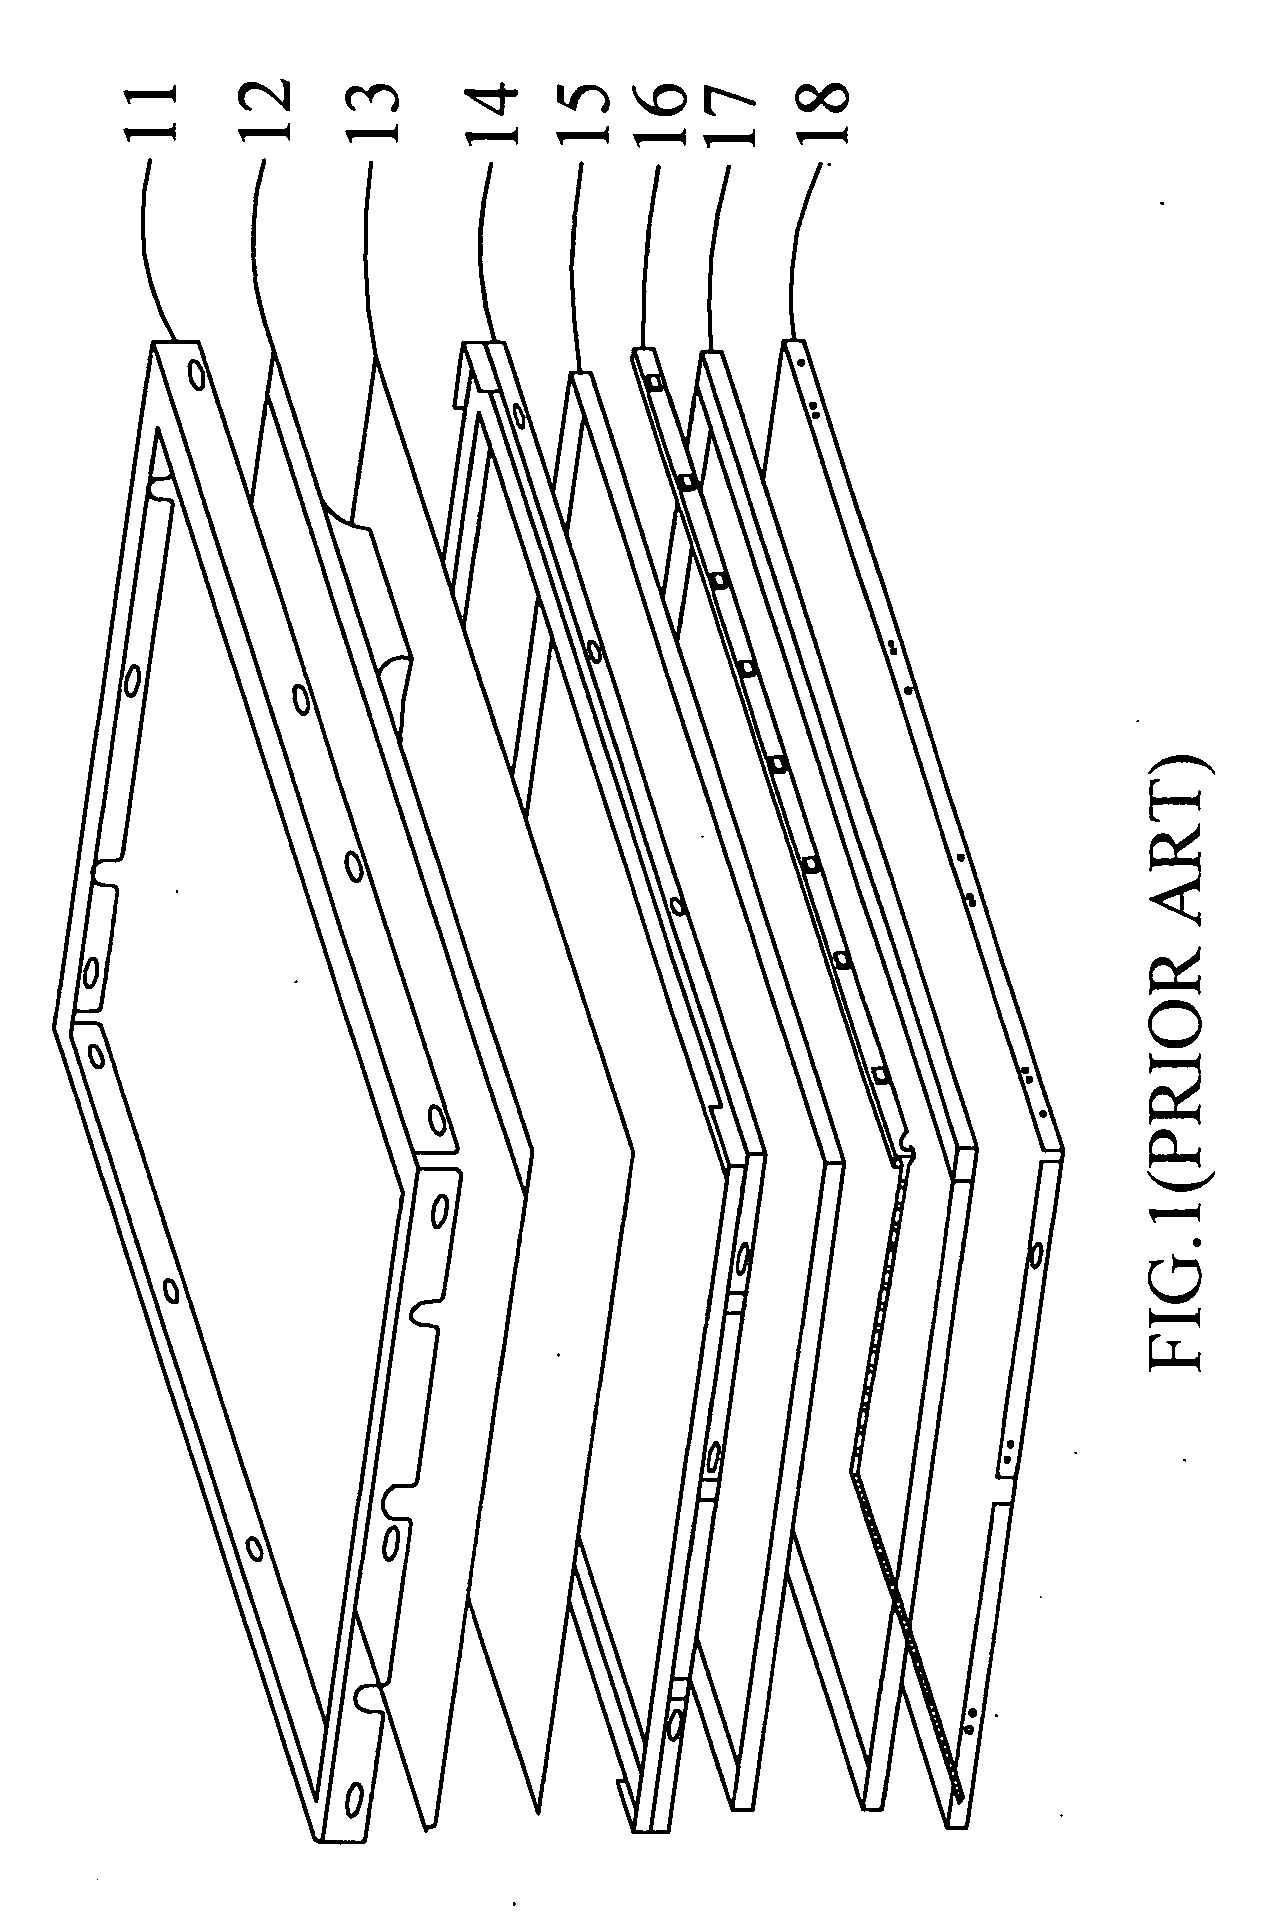 Display device with composite backlight module